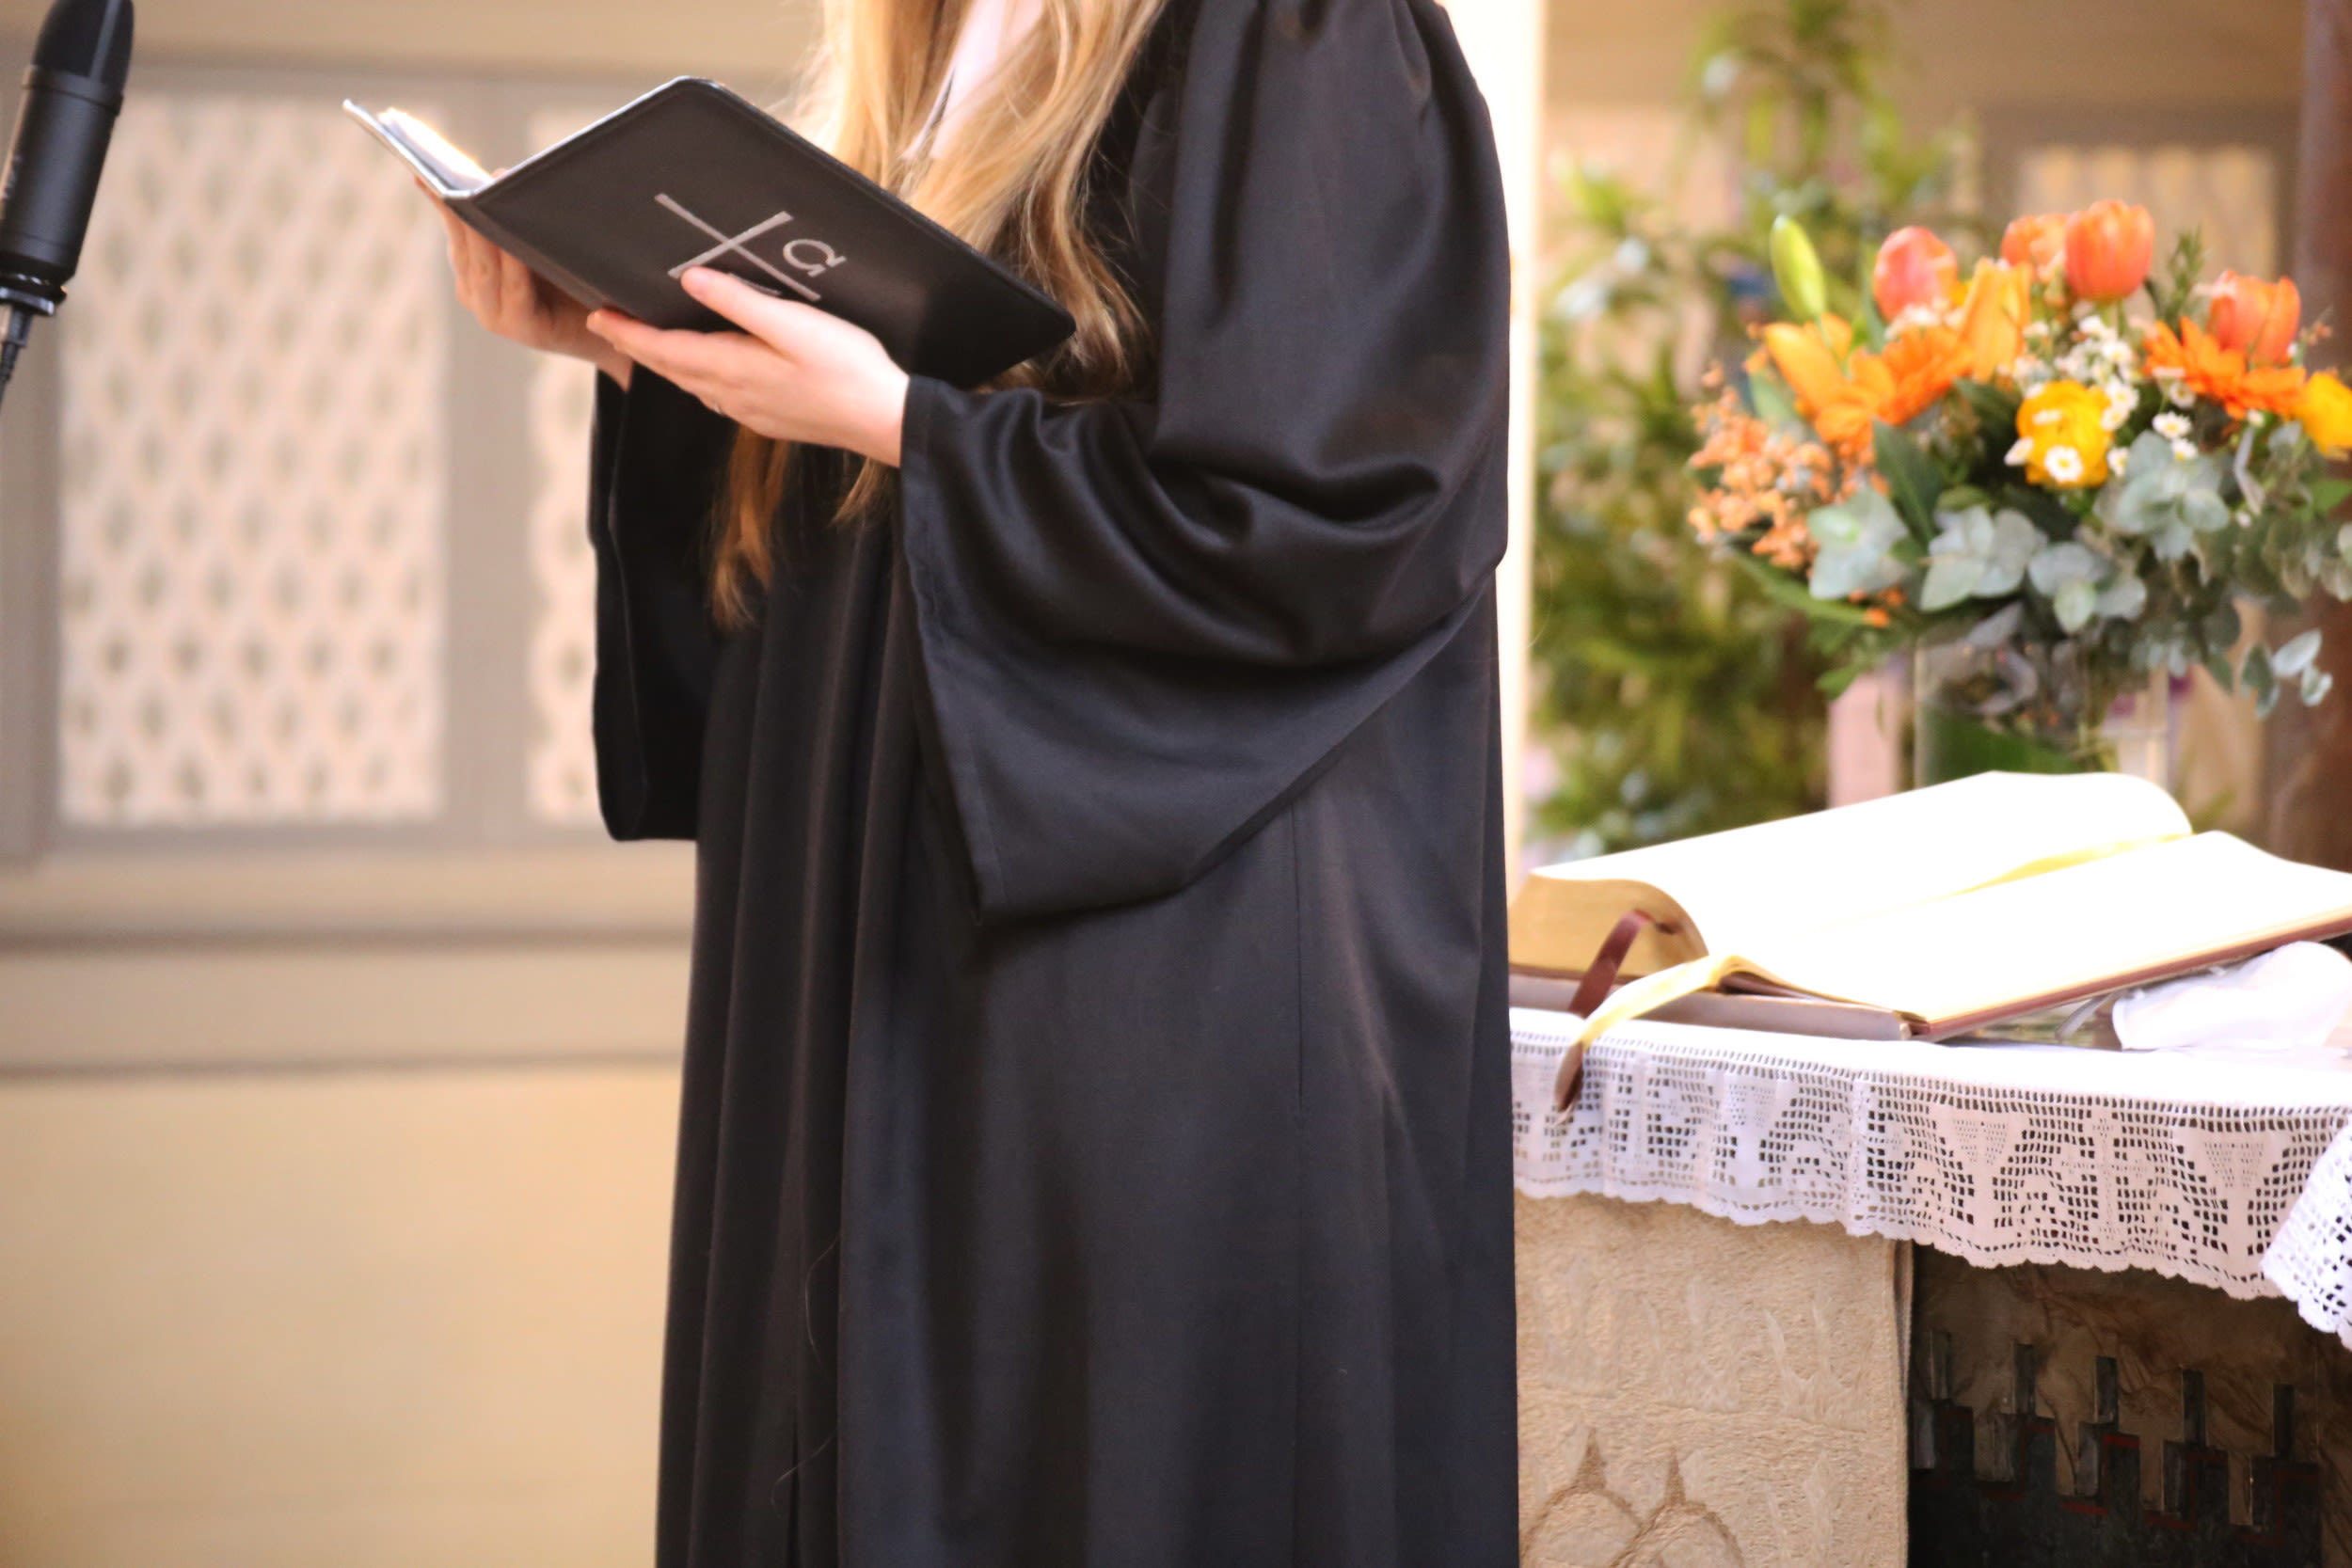 Gen Z priest shocks viewers after sharing what her Saturday night is like